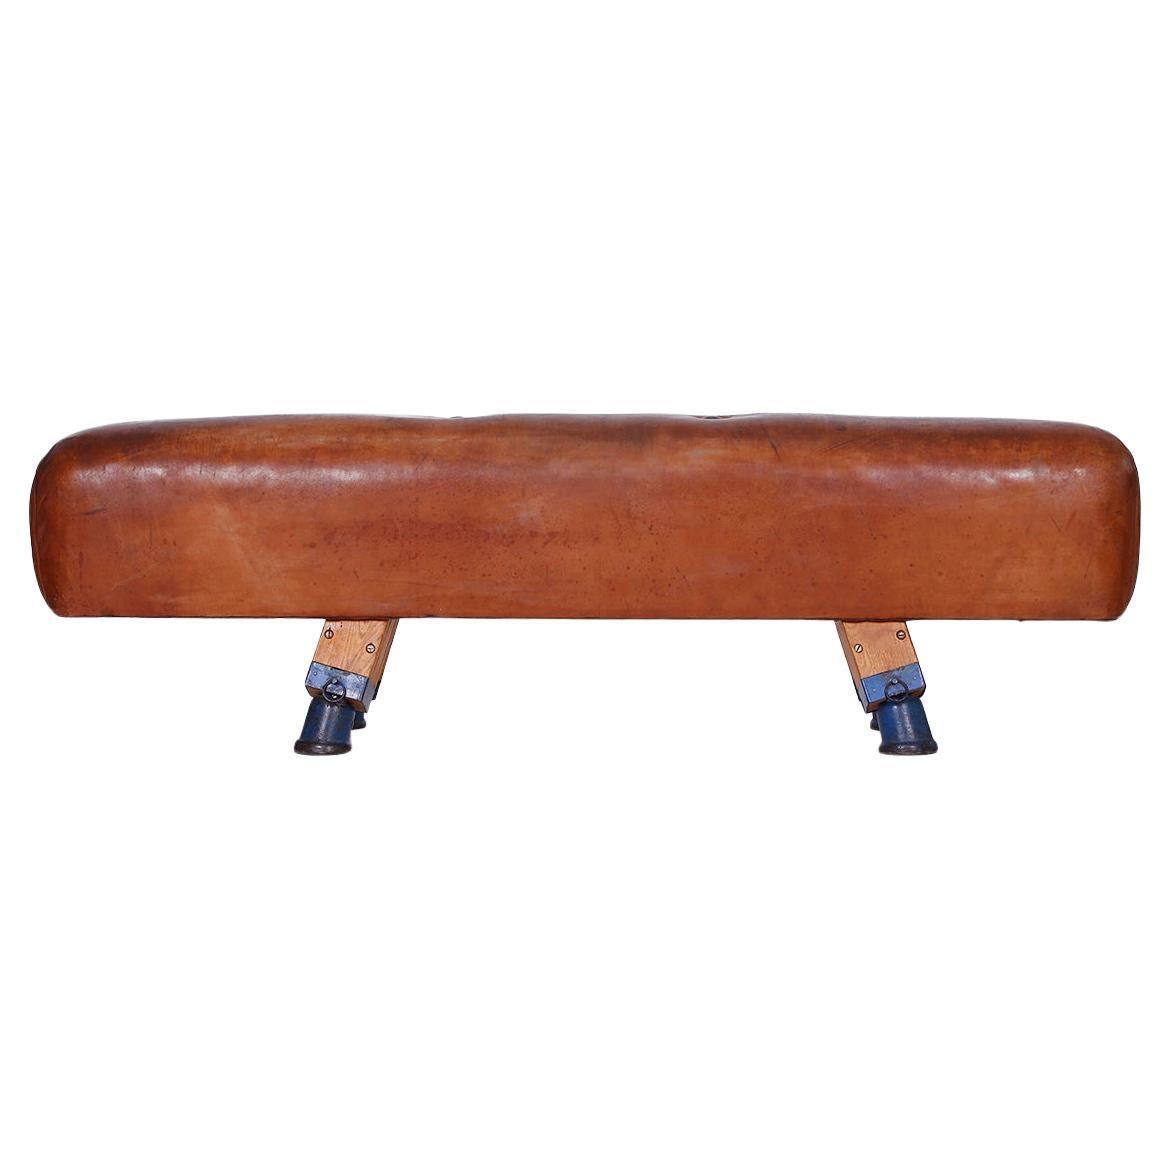 Gymnastic Leather Pommel Horse Bench Long Top, 1930s